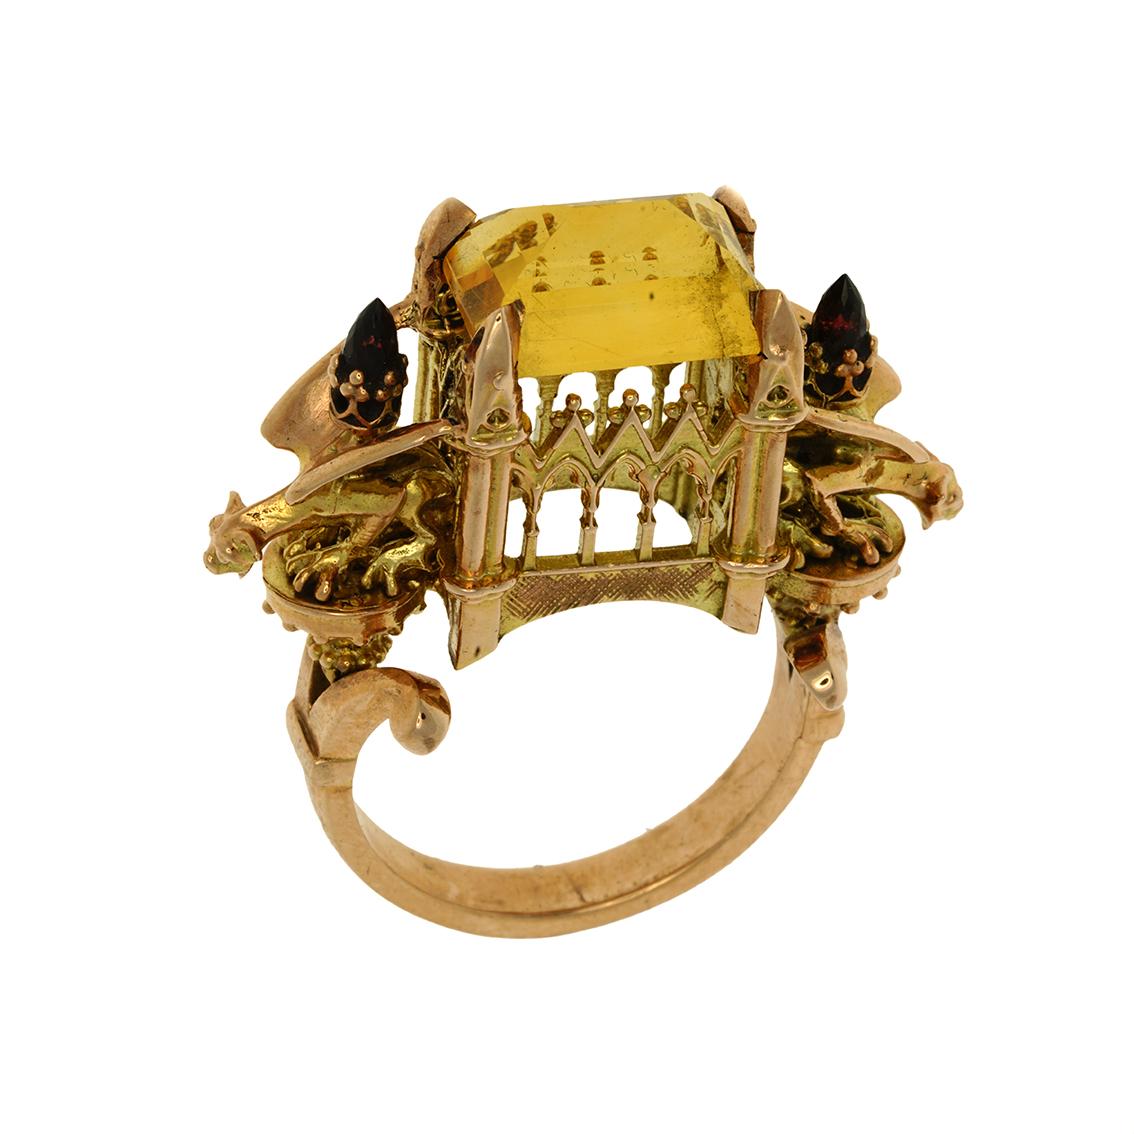 The Euphoric Triumph ring is a passionate piece. This dazzling ring is one of a kind and fits a size 7 3/4 (Australian & British size P 1/2).

Handcrafted in 9ct yellow gold, this vibrant ring features a radiant citrine, measuring 11.8mm x 8mm. The